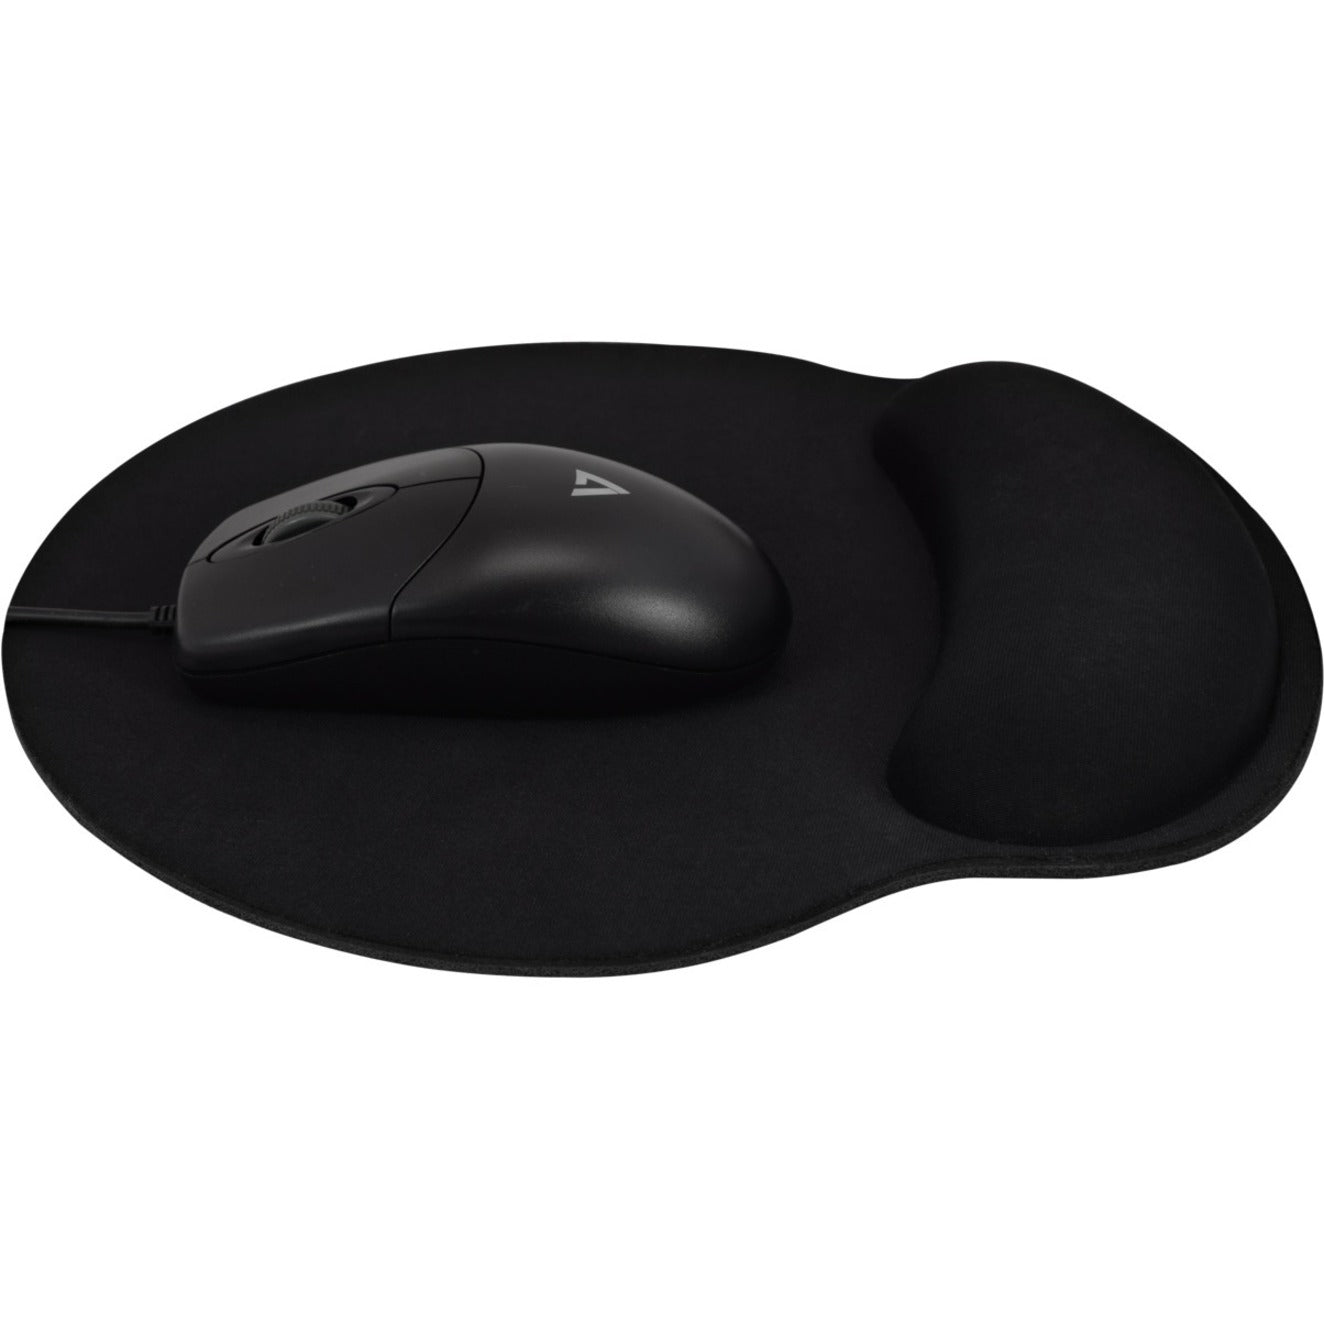 V7 MP03BLK Memory Foam Support Mouse Pad, Ergo Wrist Support, Non Skid Bottom